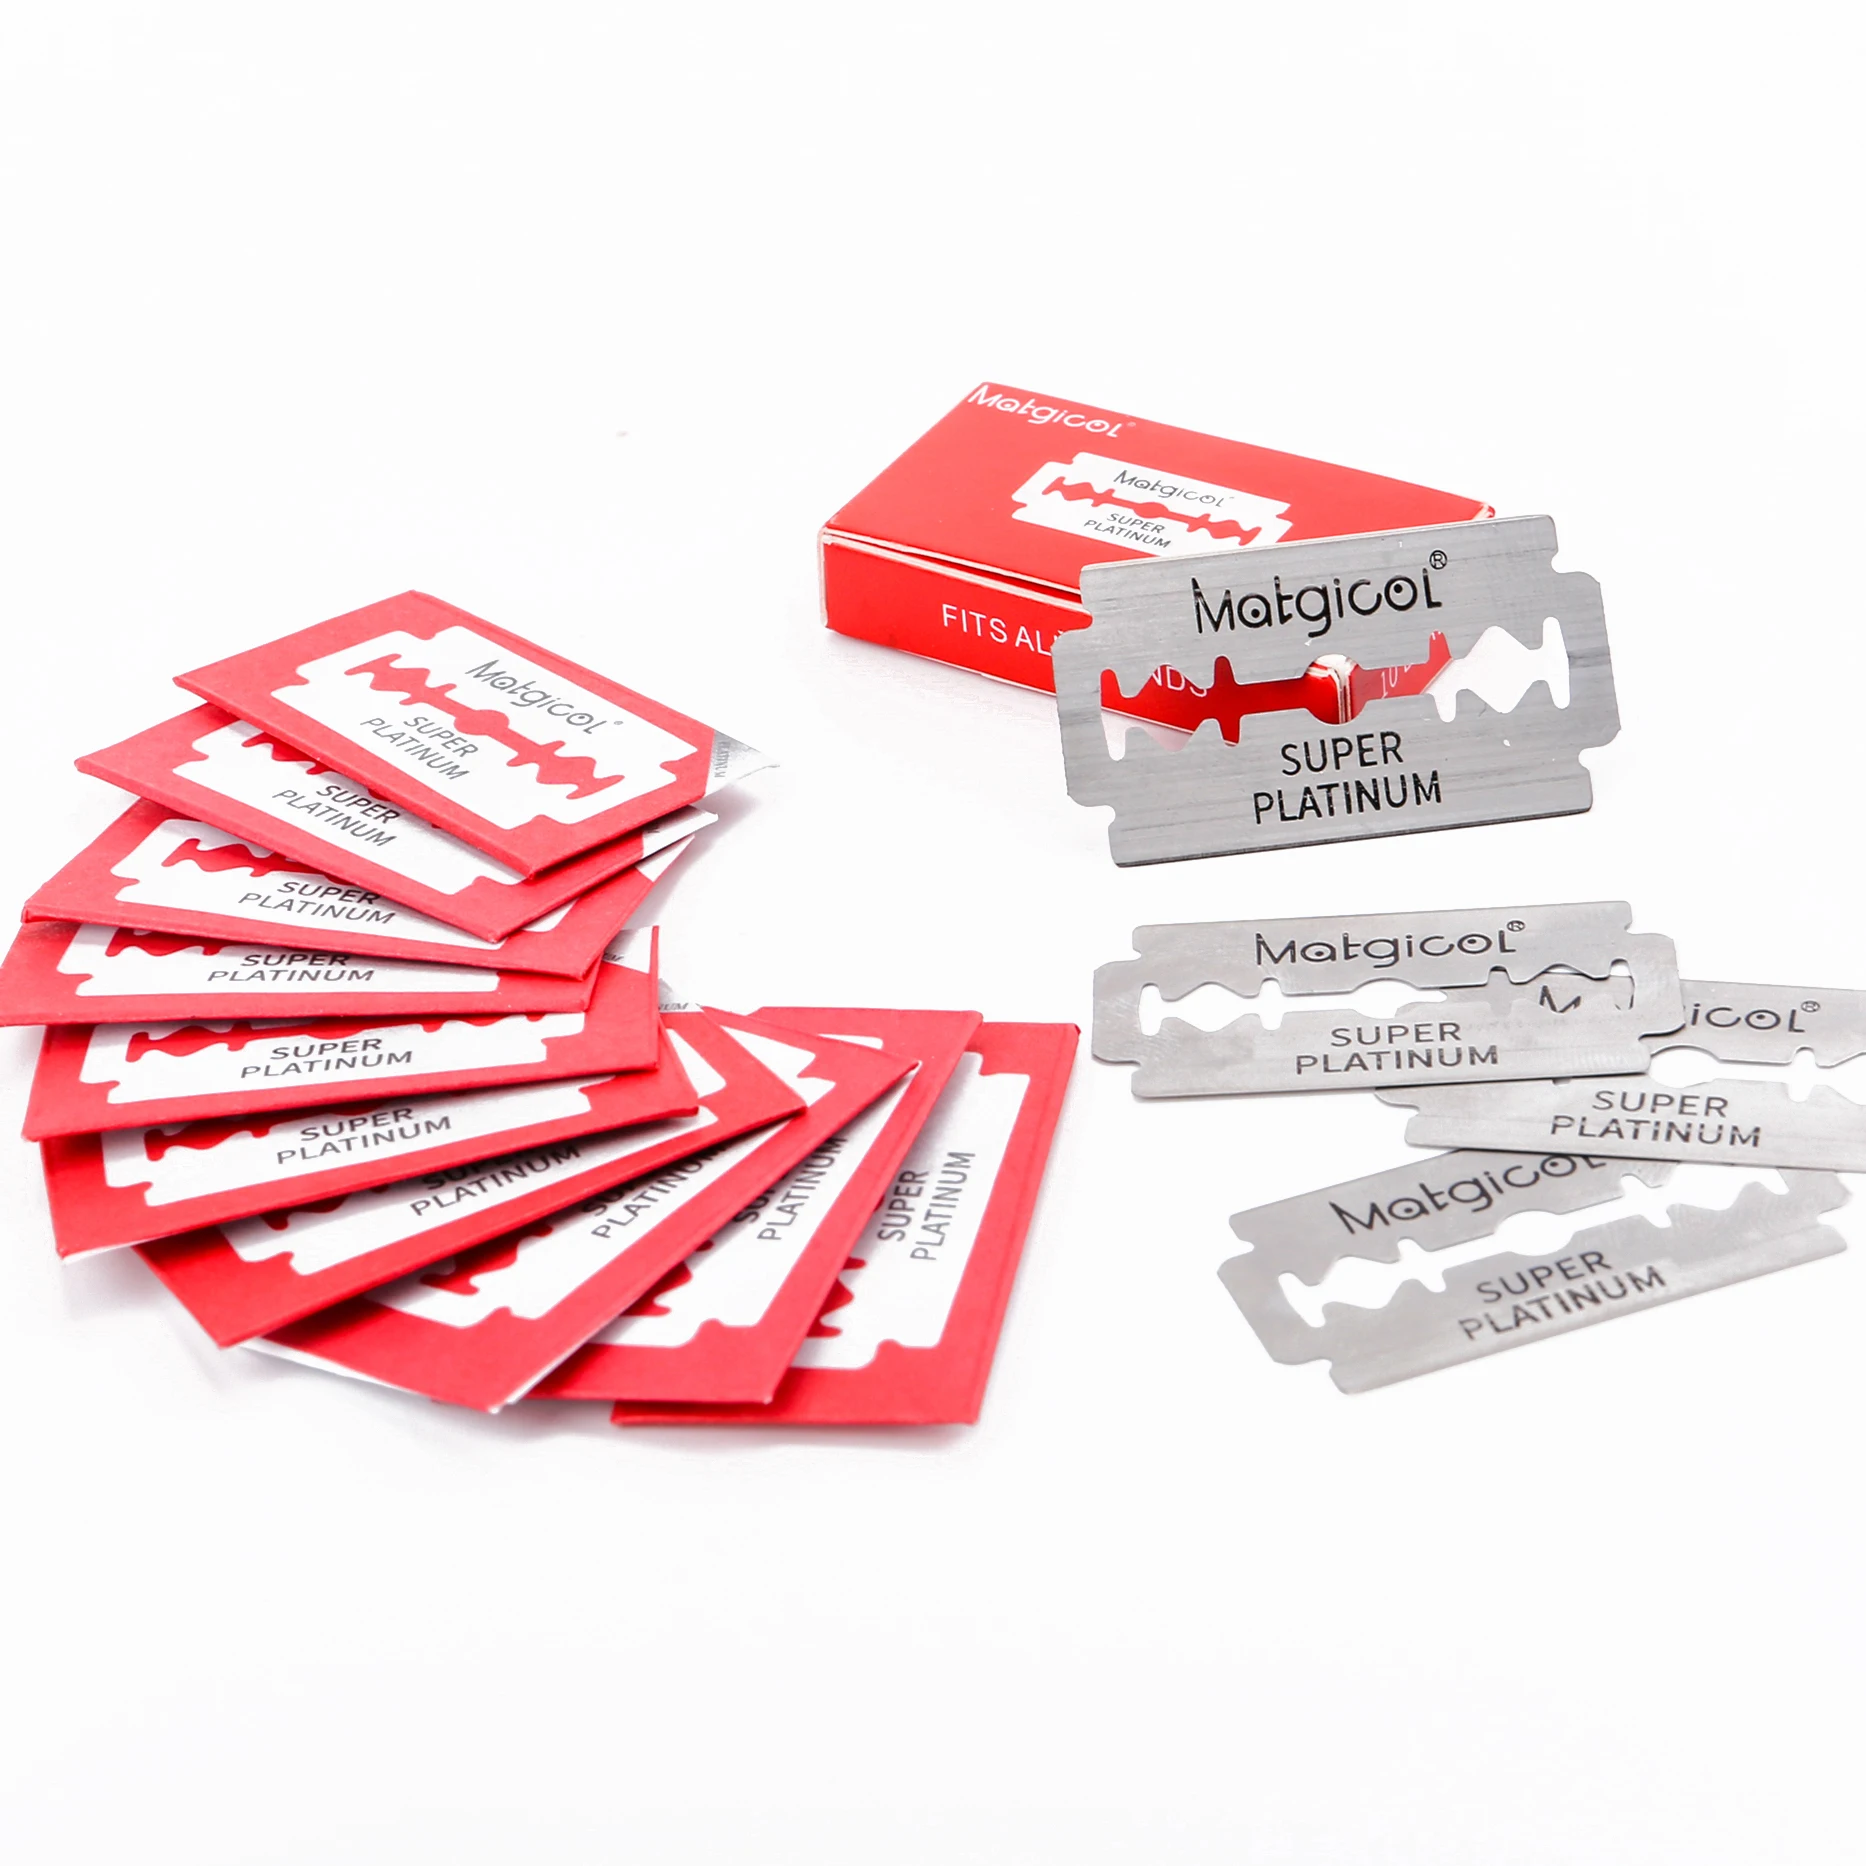 

10000pcs Double Edge Shaving Razor Blades Men Face Care Classical Stainless Steel Smooth Shaving Shave Beard Manual Shaver 74m2#, Silver